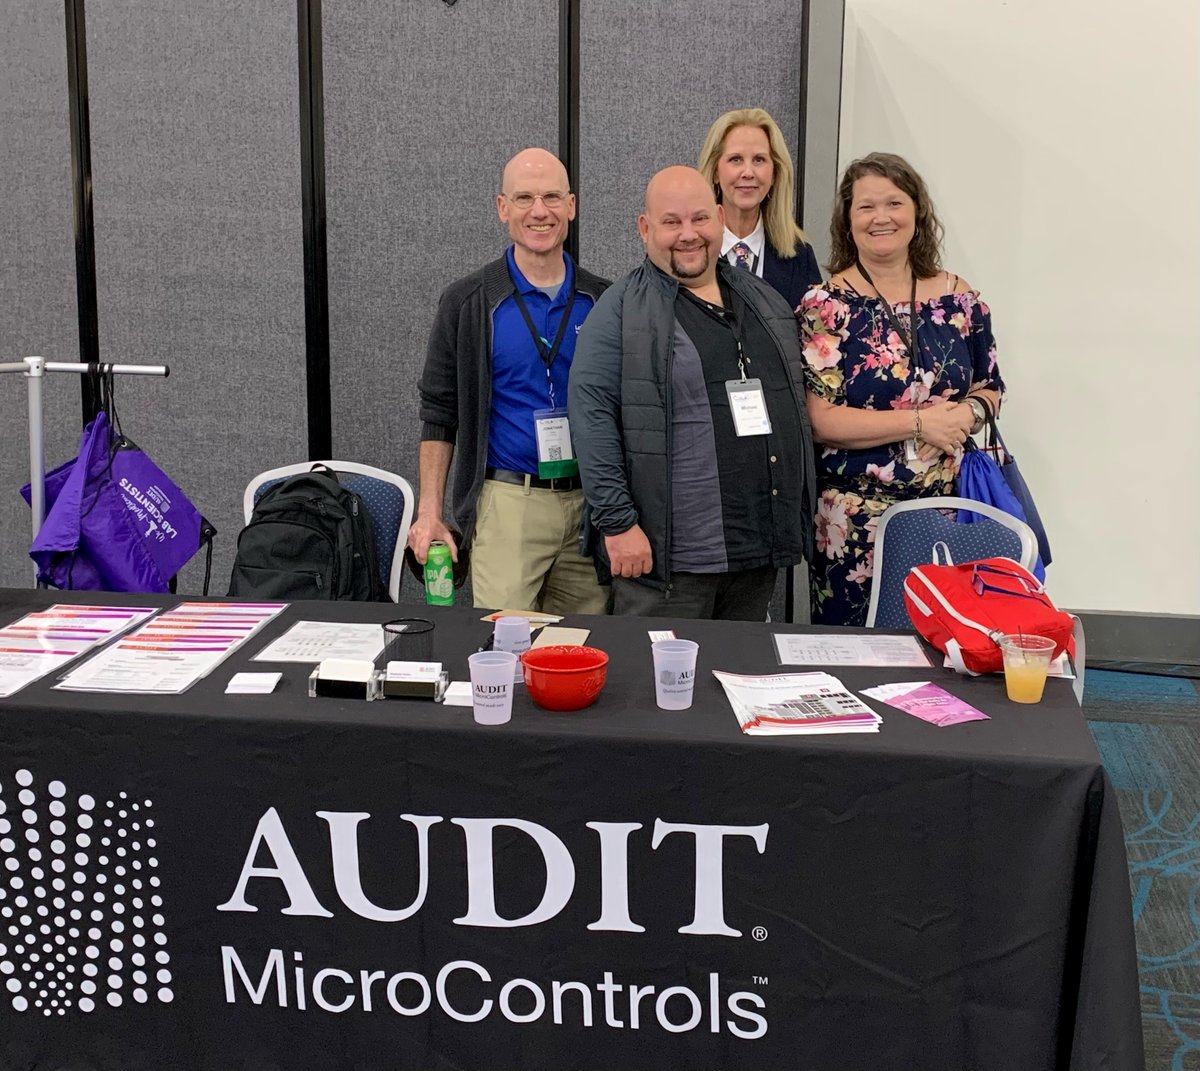 What a great week at the COLA Enrichment Forum! We enjoyed seeing old friends and meeting new ones! Pictured here is Stephanie Holder, National Sales Manager for AUDIT along with several other COLA attendees.